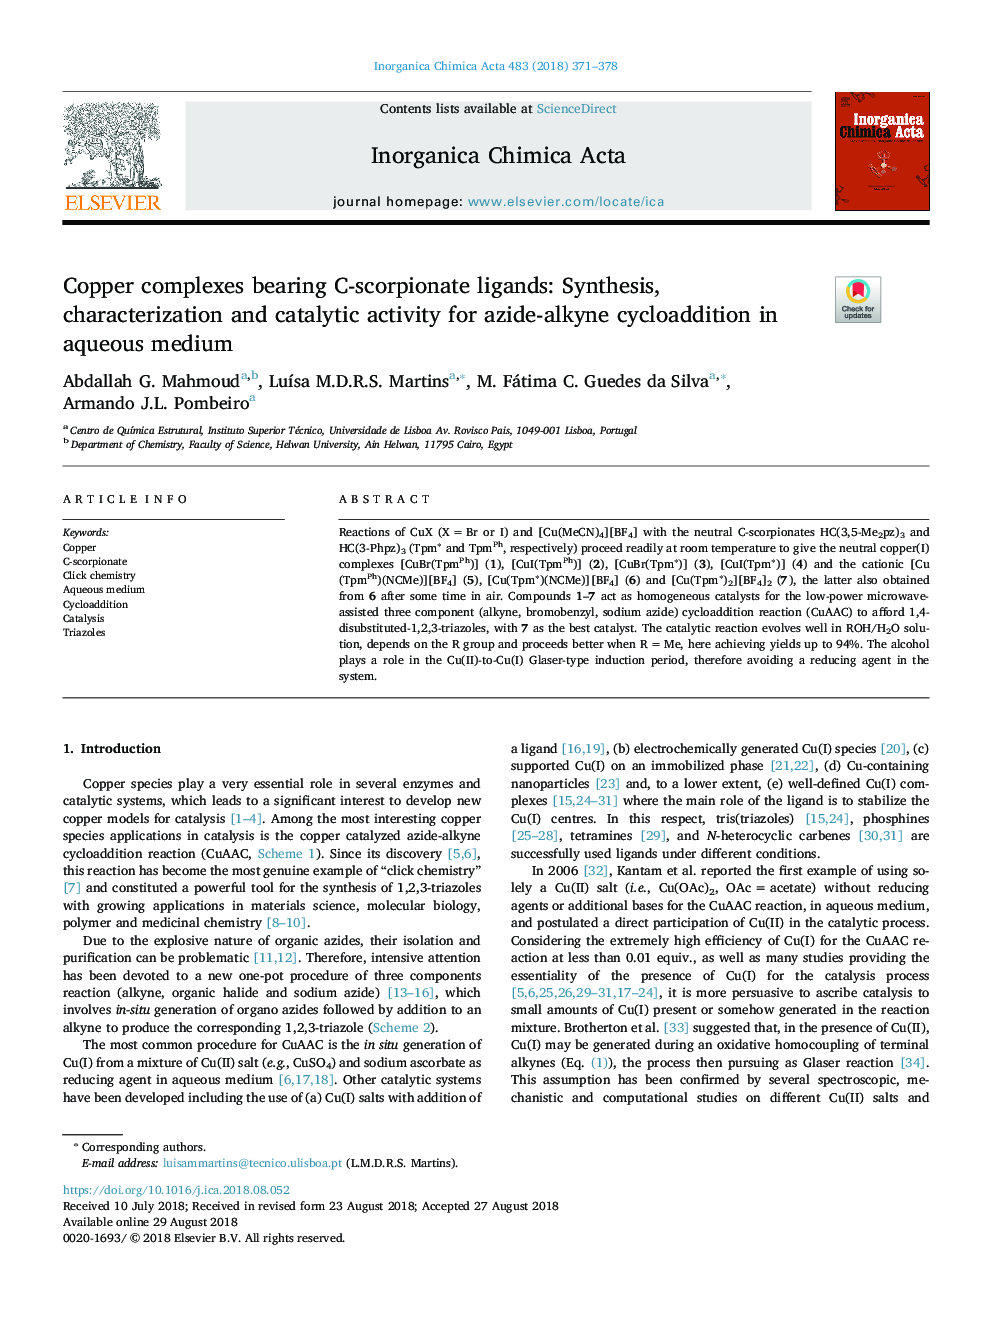 Copper complexes bearing C-scorpionate ligands: Synthesis, characterization and catalytic activity for azide-alkyne cycloaddition in aqueous medium